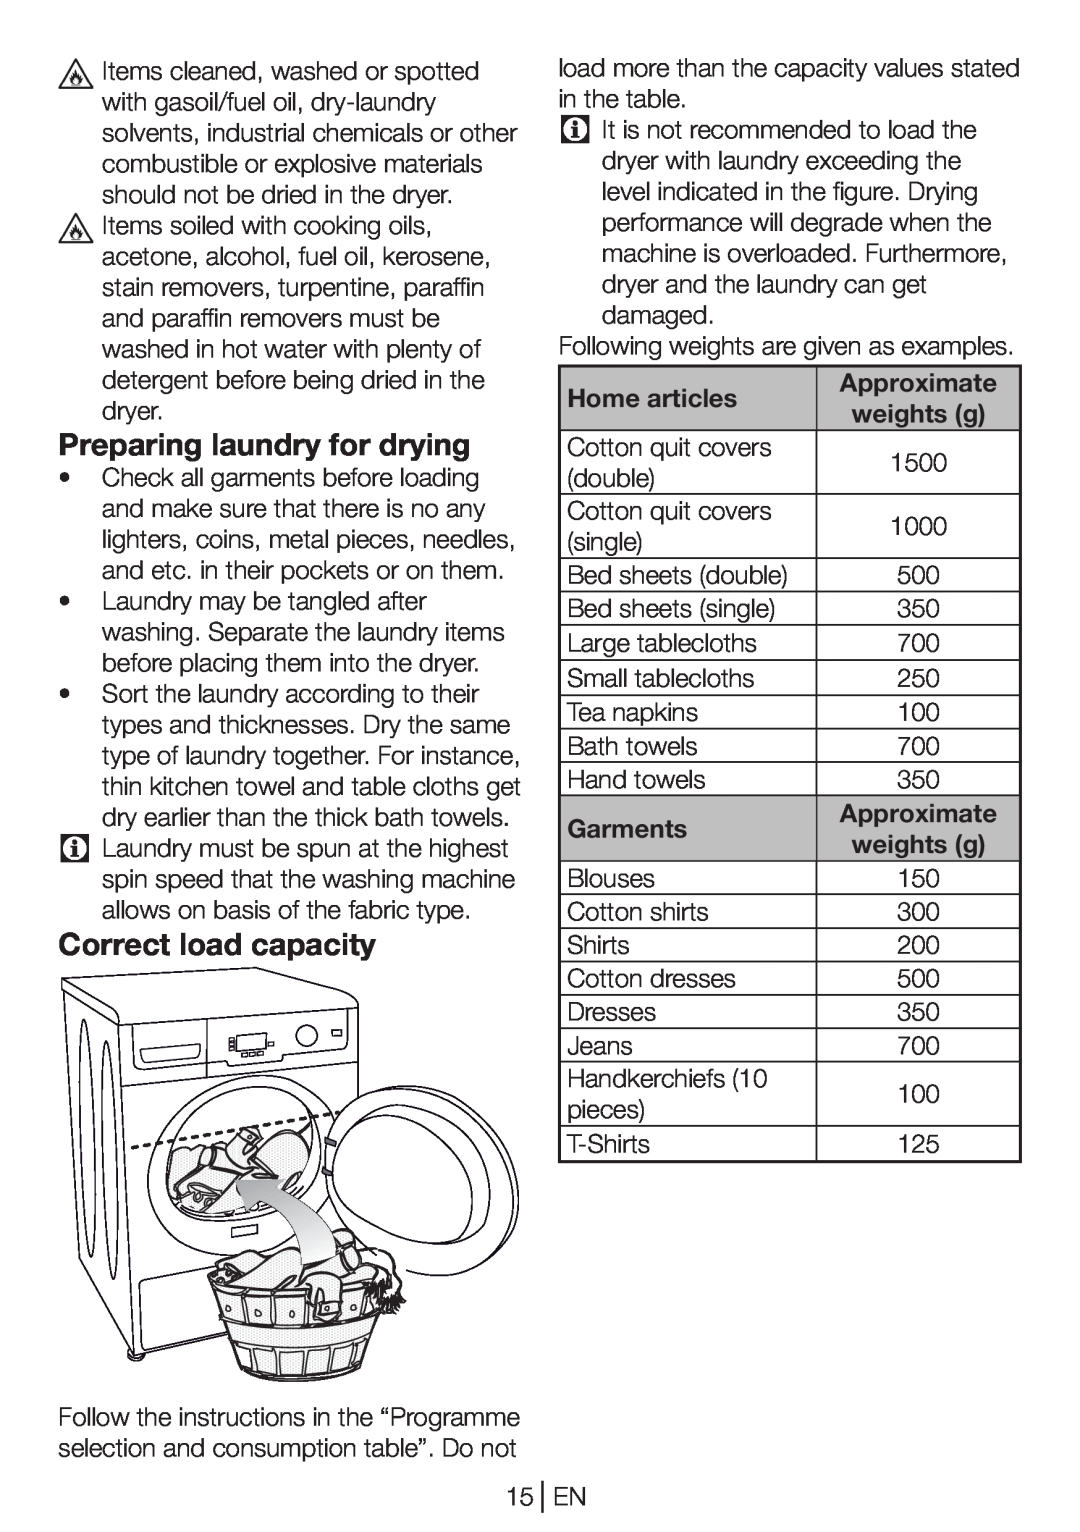 Beko DP 8045 CW manual Preparing laundry for drying, Correct load capacity, Home articles, weights g, Garments 